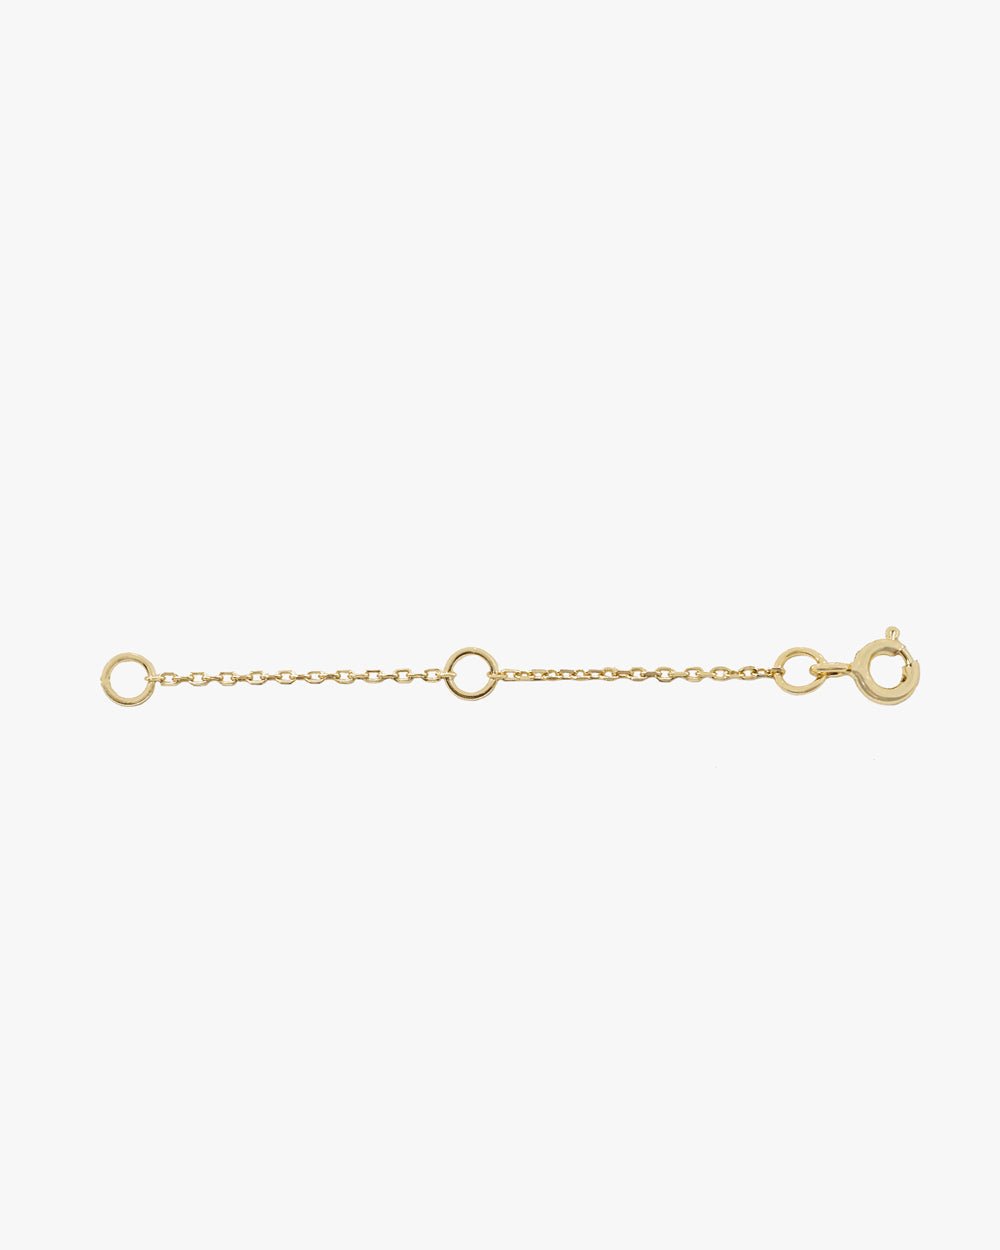 Gold Necklace Extender – The Rescue Kit Company